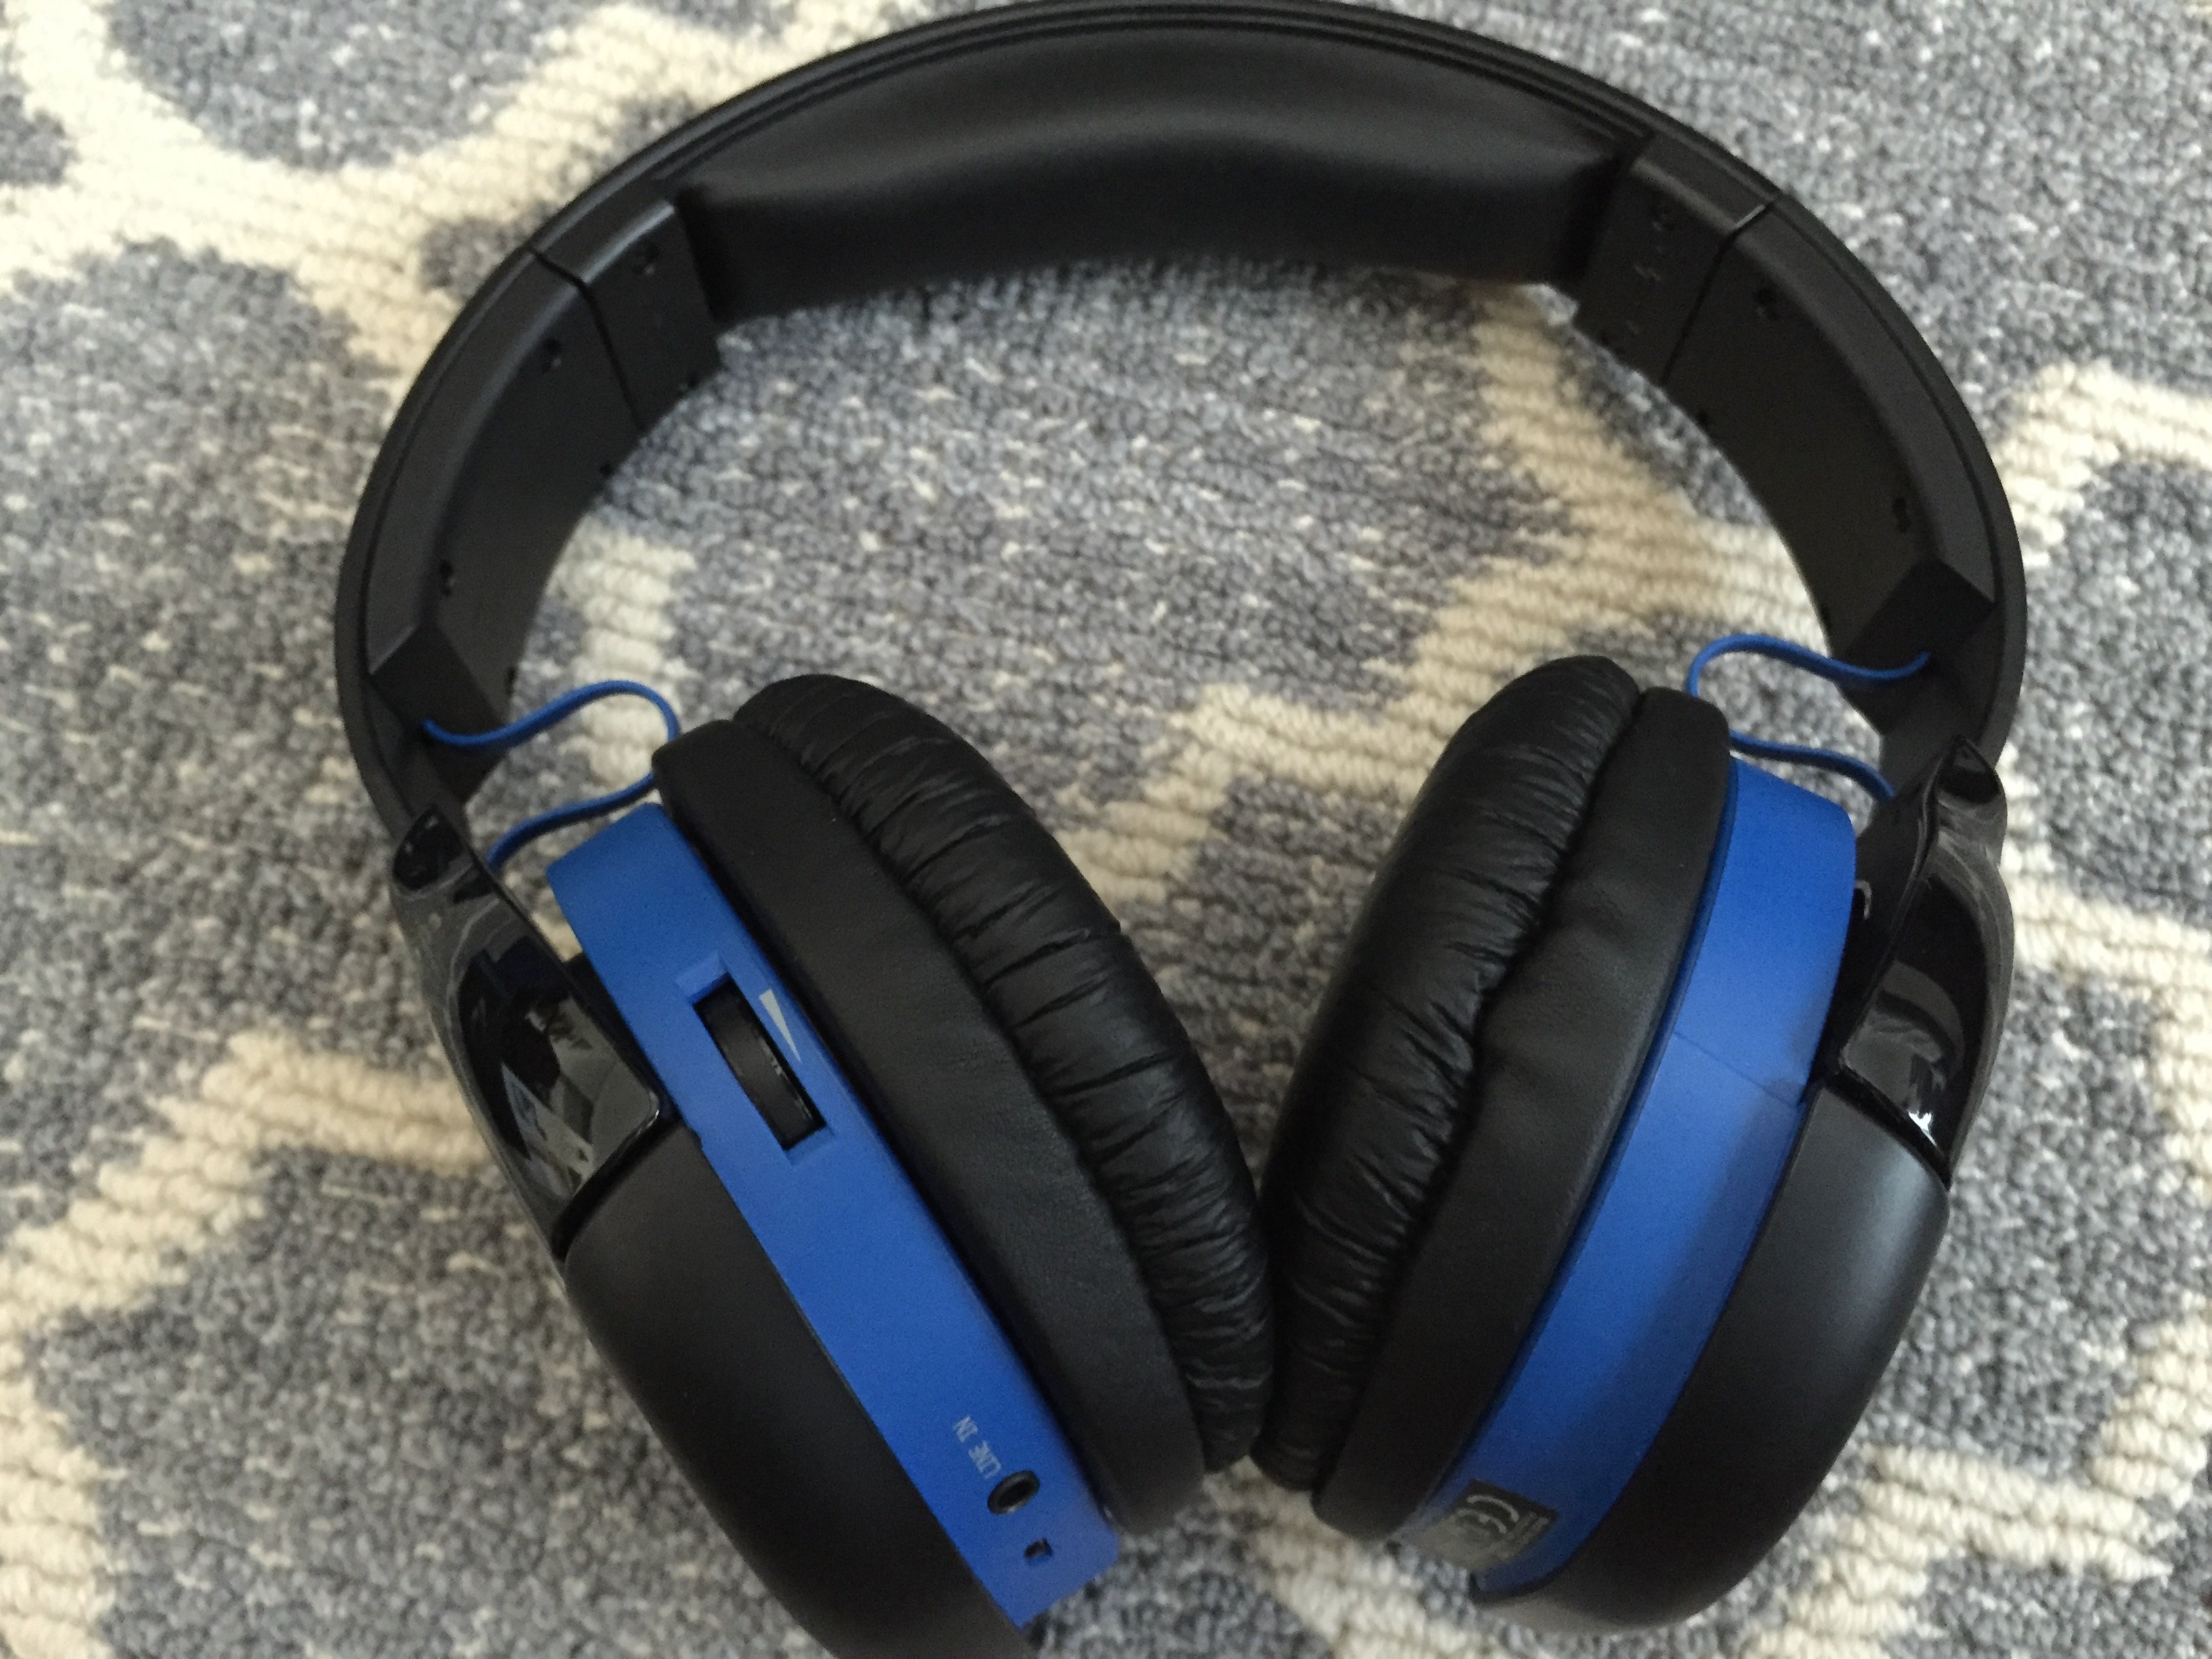 Official GBAtemp Review: PDP Afterglow Kral PS4/PC Wireless Headset  (Hardware) | GBAtemp.net - The Independent Video Game Community